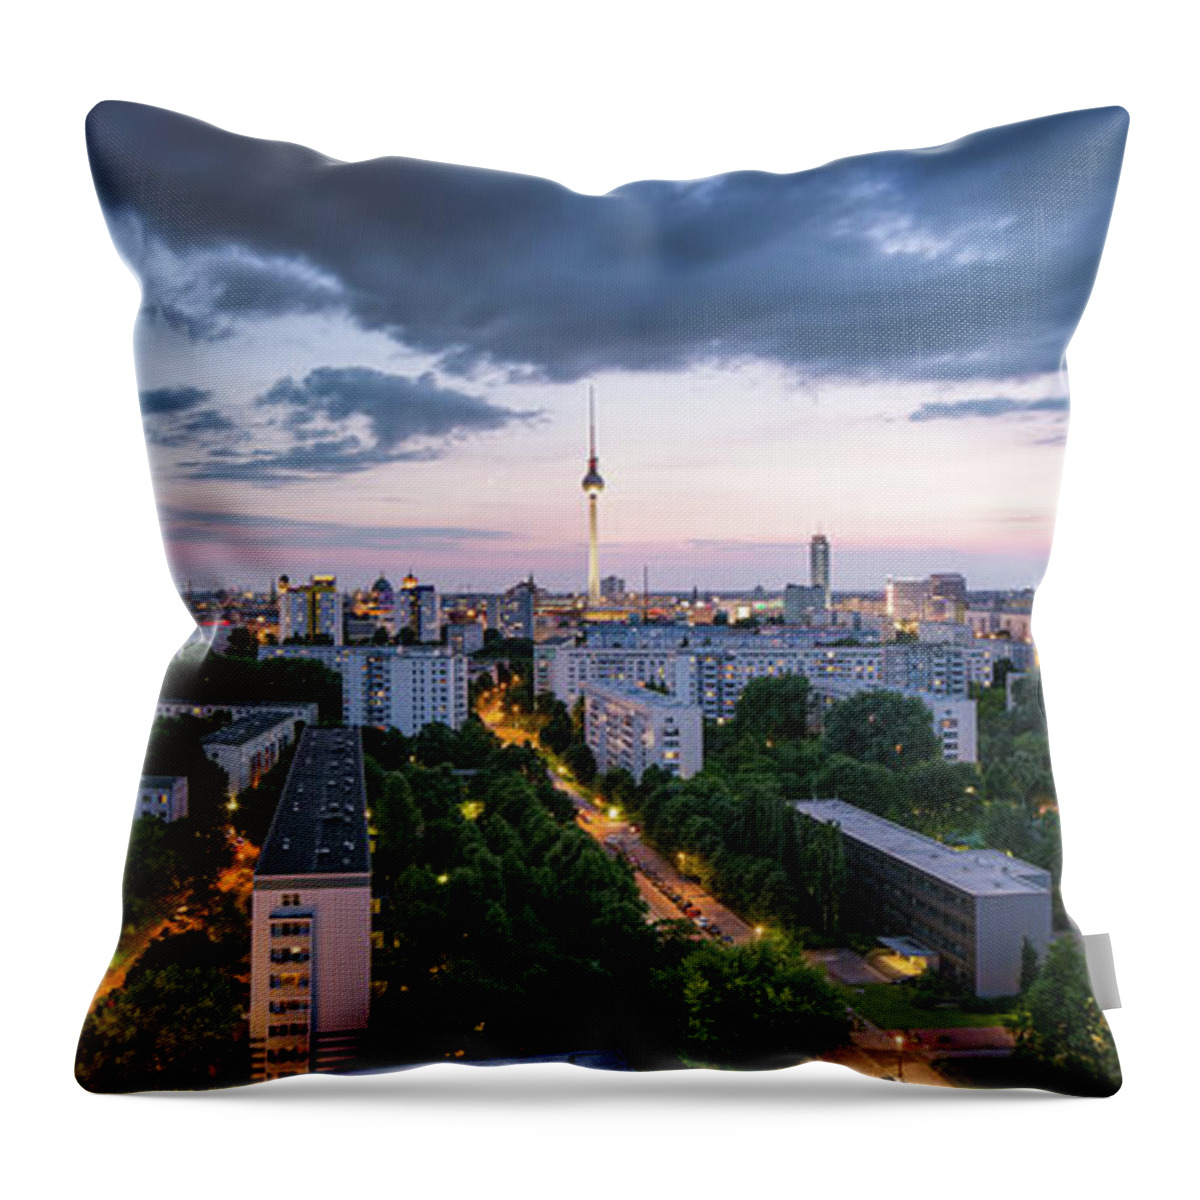 Tranquility Throw Pillow featuring the photograph Berlin Skyline Panorama With Fernsehturm by Spreephoto.de